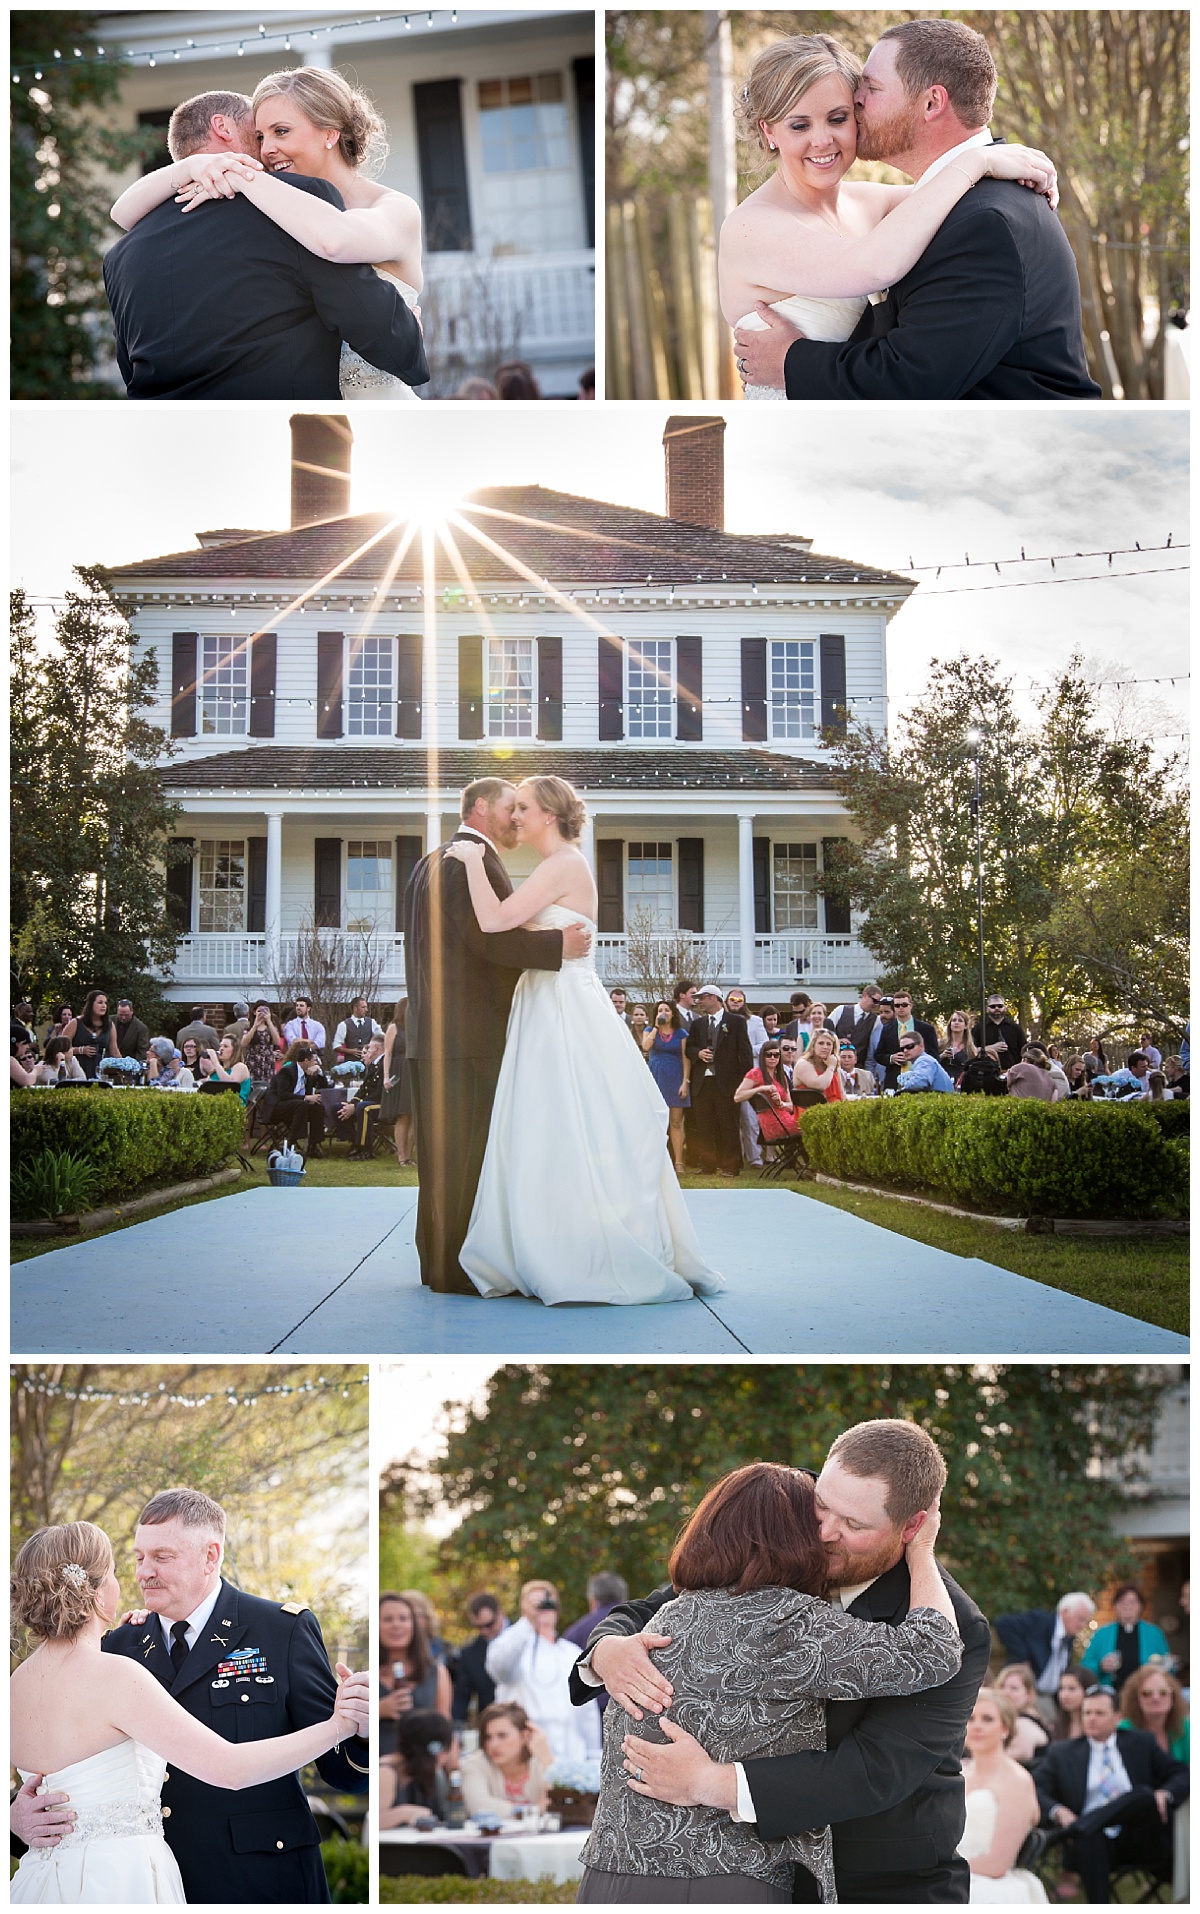 Sunset reception and first dances at Kershaw Cornwallis house